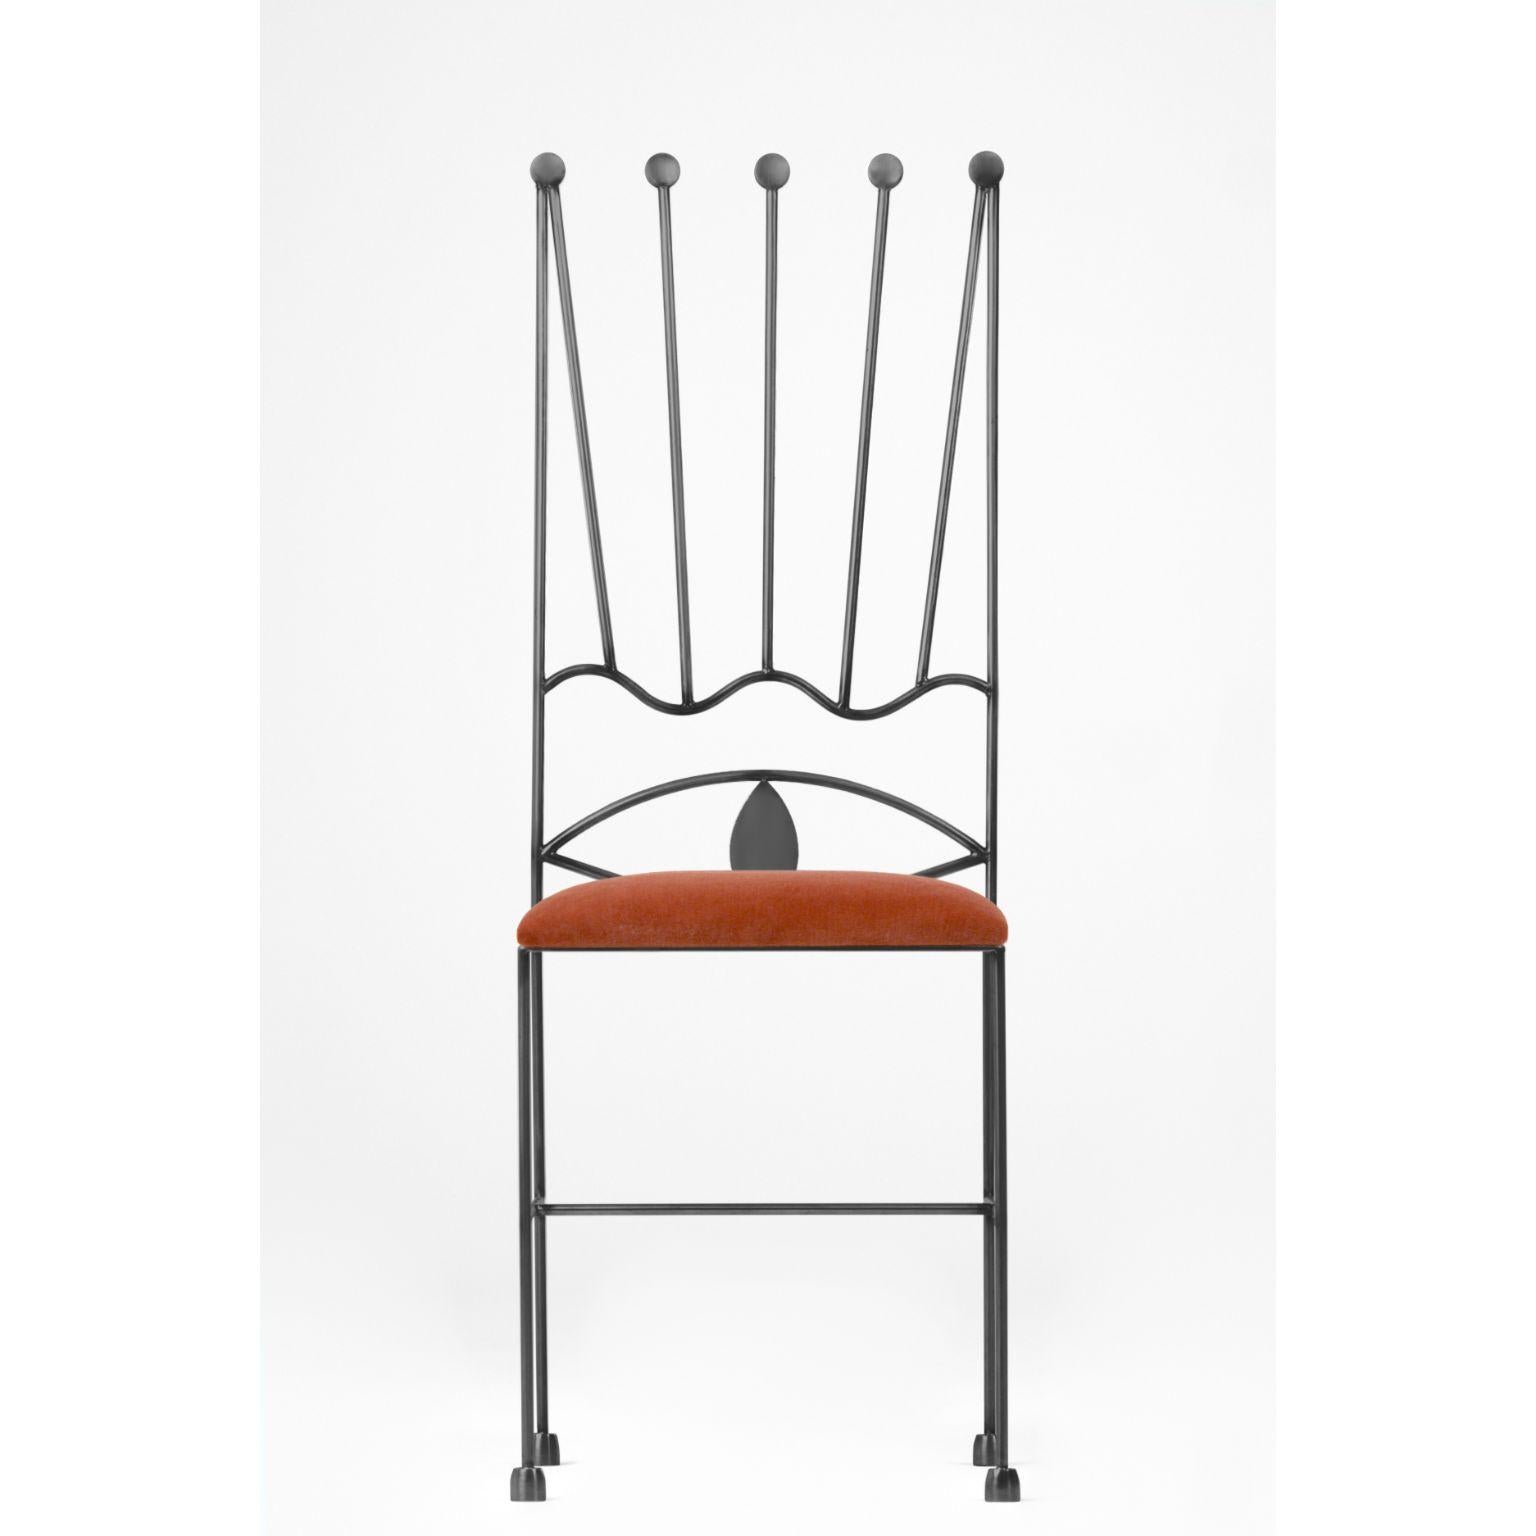 Other Set of 8 Collezione Surrealista Chairs by Qvinto Studio For Sale